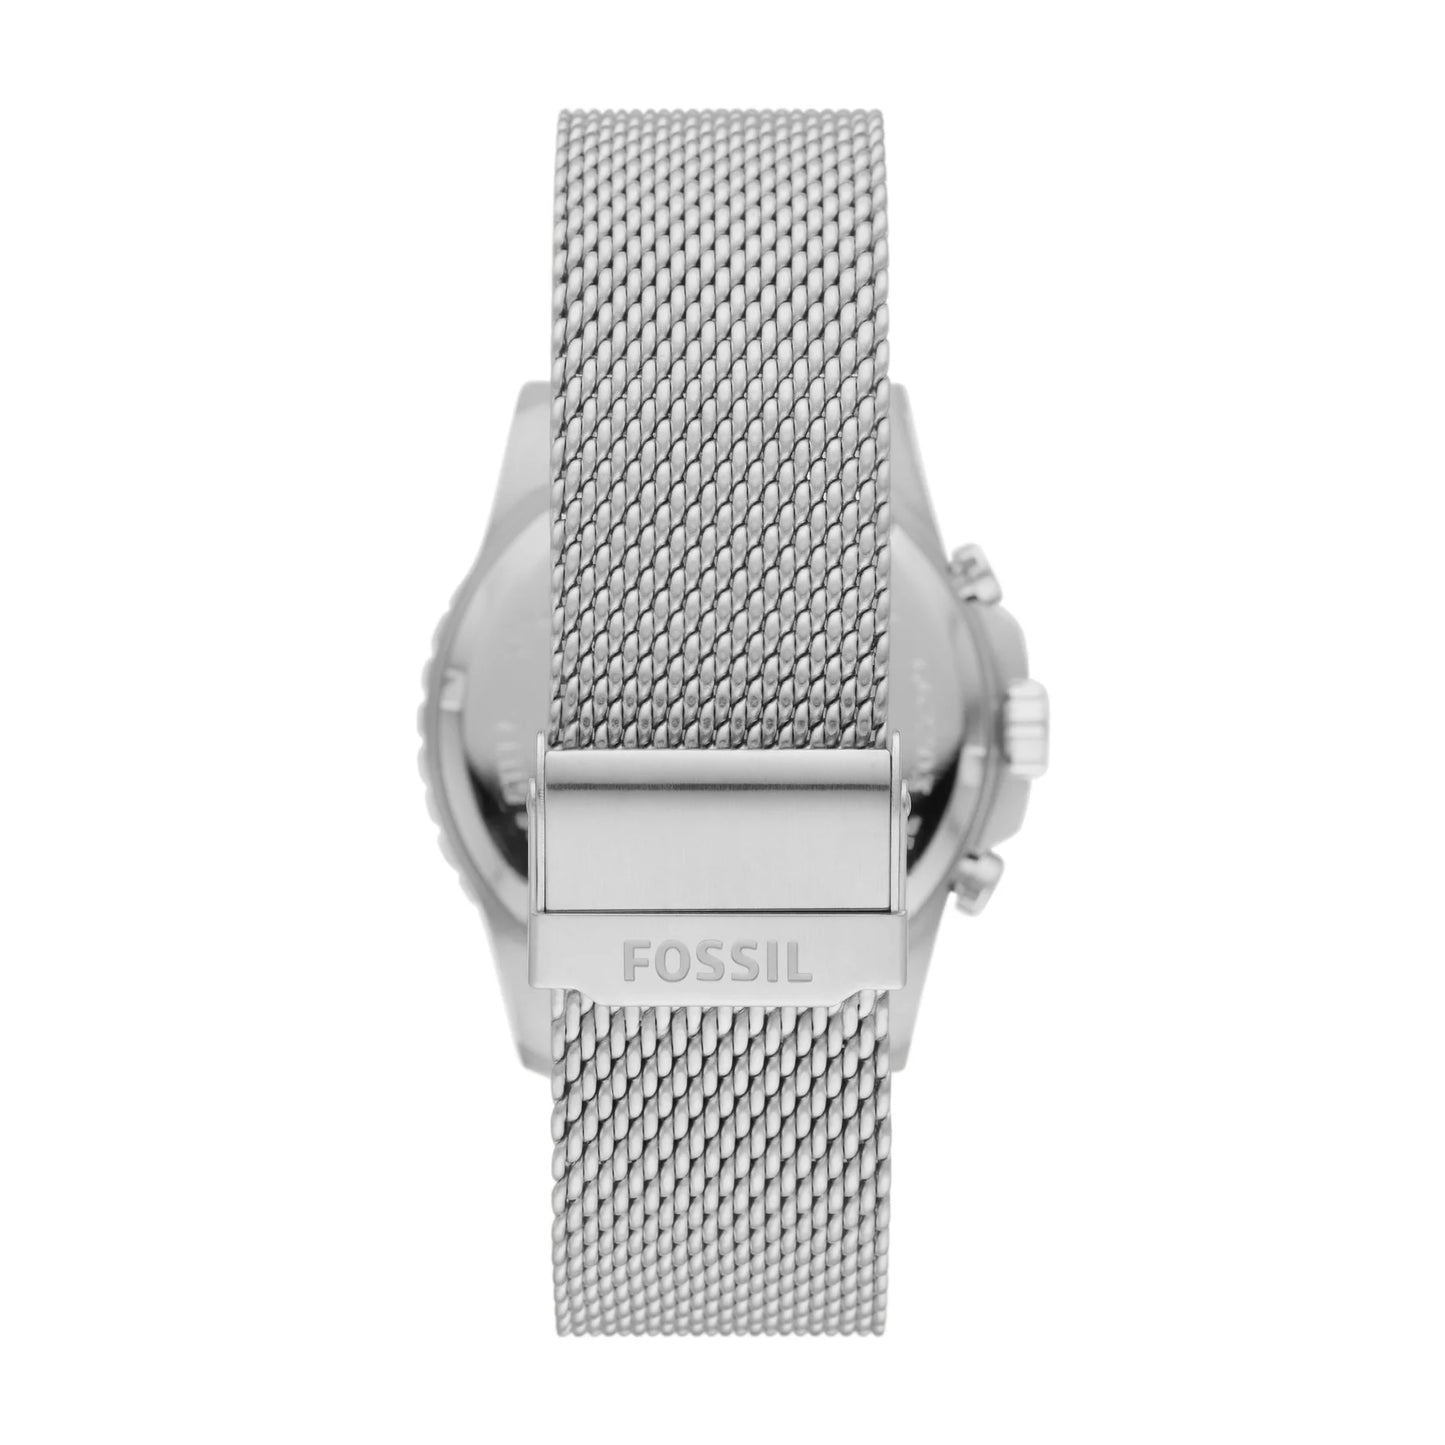 FB-01 Chronograph Stainless Steel Mesh Watch